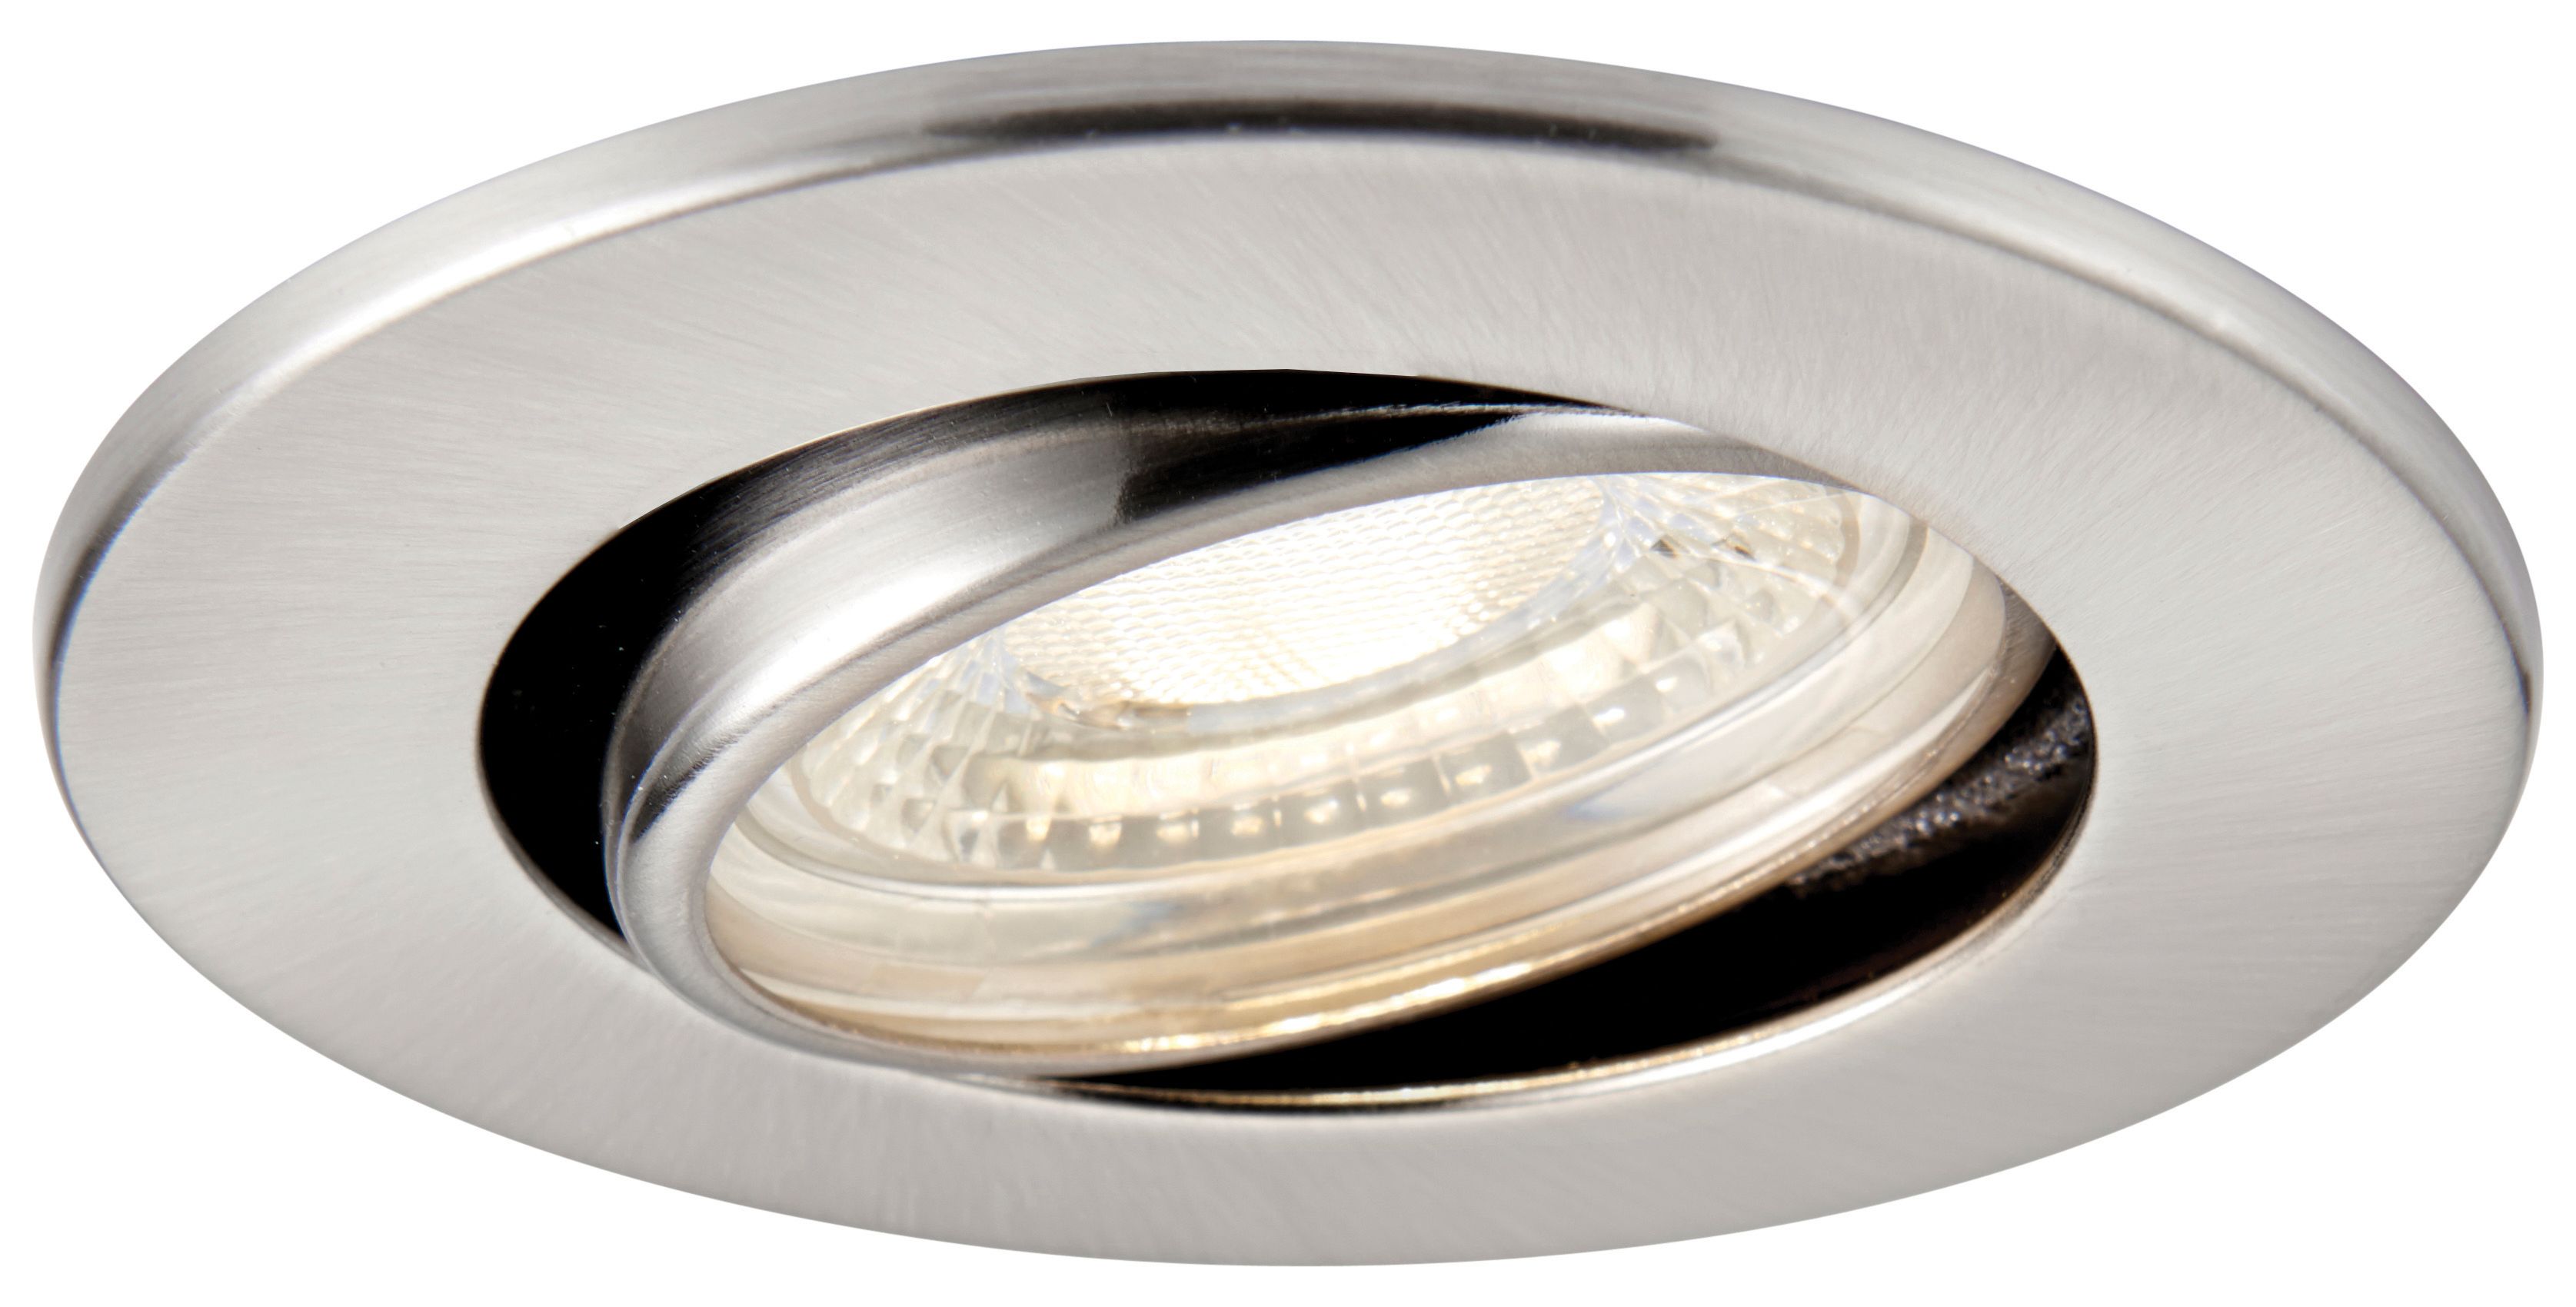 Saxby Integrated LED Fire Rated Adjustable Cool White Dimmable Downlight 500lm - Brushed Nickel